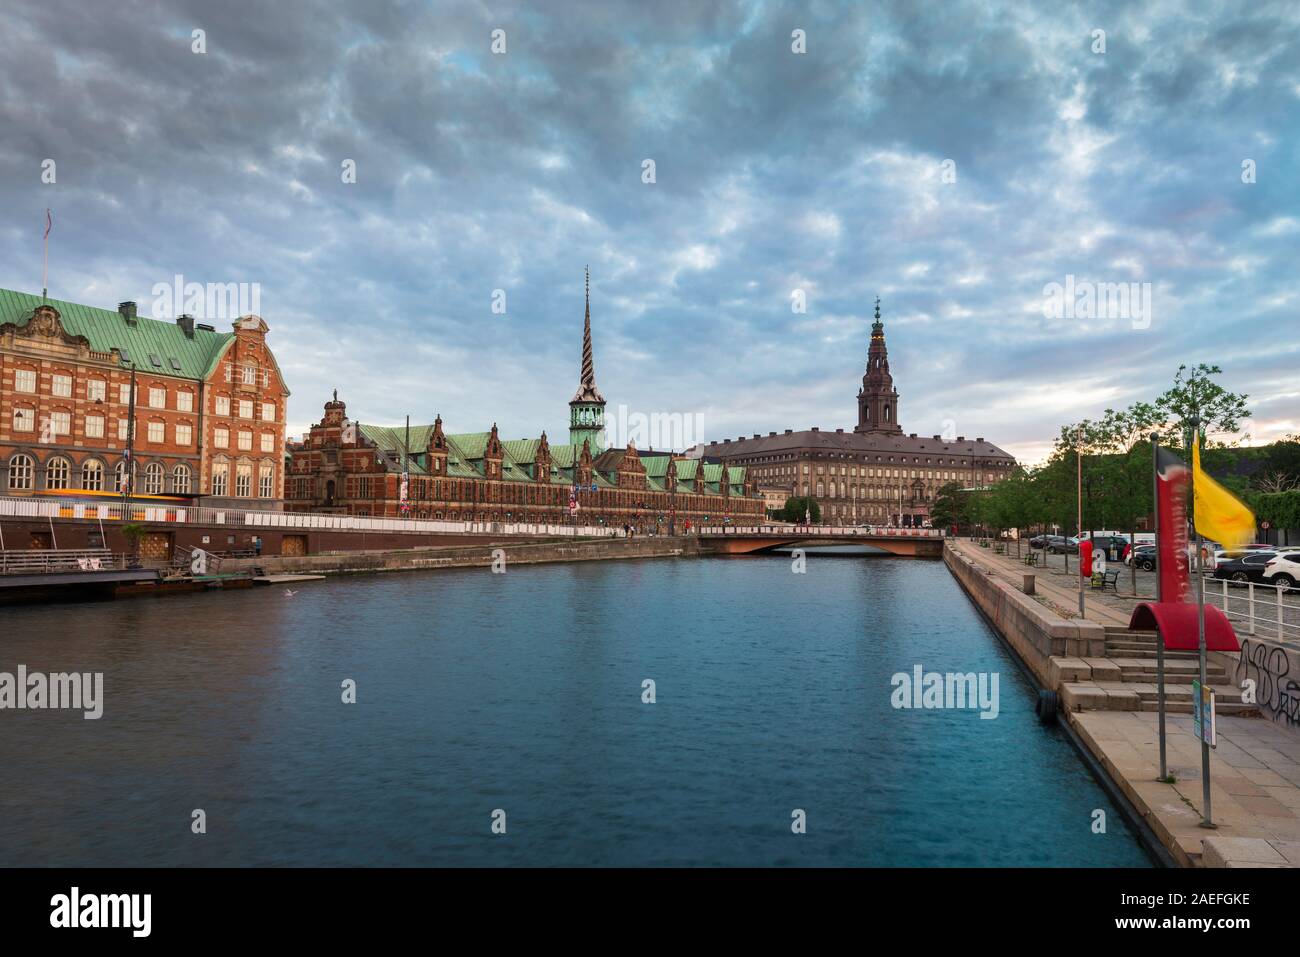 Copenhagen city, view at dusk of Slotsholmen canal with the Borse stock exchange and Christianborg Slot (palace) visible in the distance, Copenhagen Stock Photo